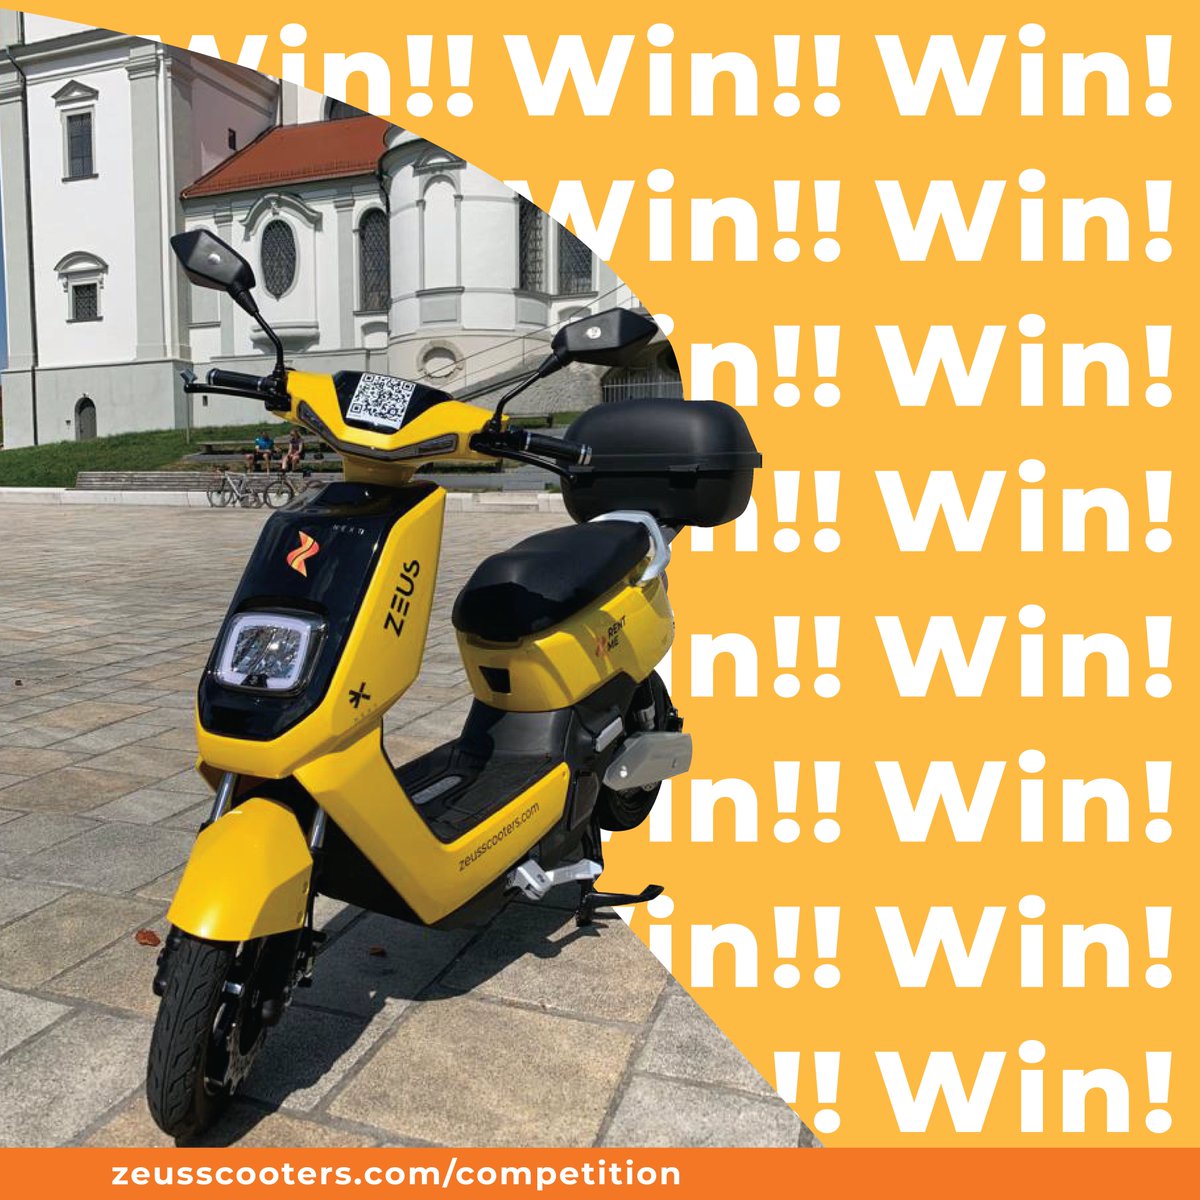 Win a free e-moped from the ZEUS fleet! 🛵 Take a Pay as you go ride over 20 minutes and be in with a chance to a moped! 😳 If you have a pass active don’t be worried – Grab a moped Top-Up Pass online and be entered direct into the competition! zeusscooters.com/competition